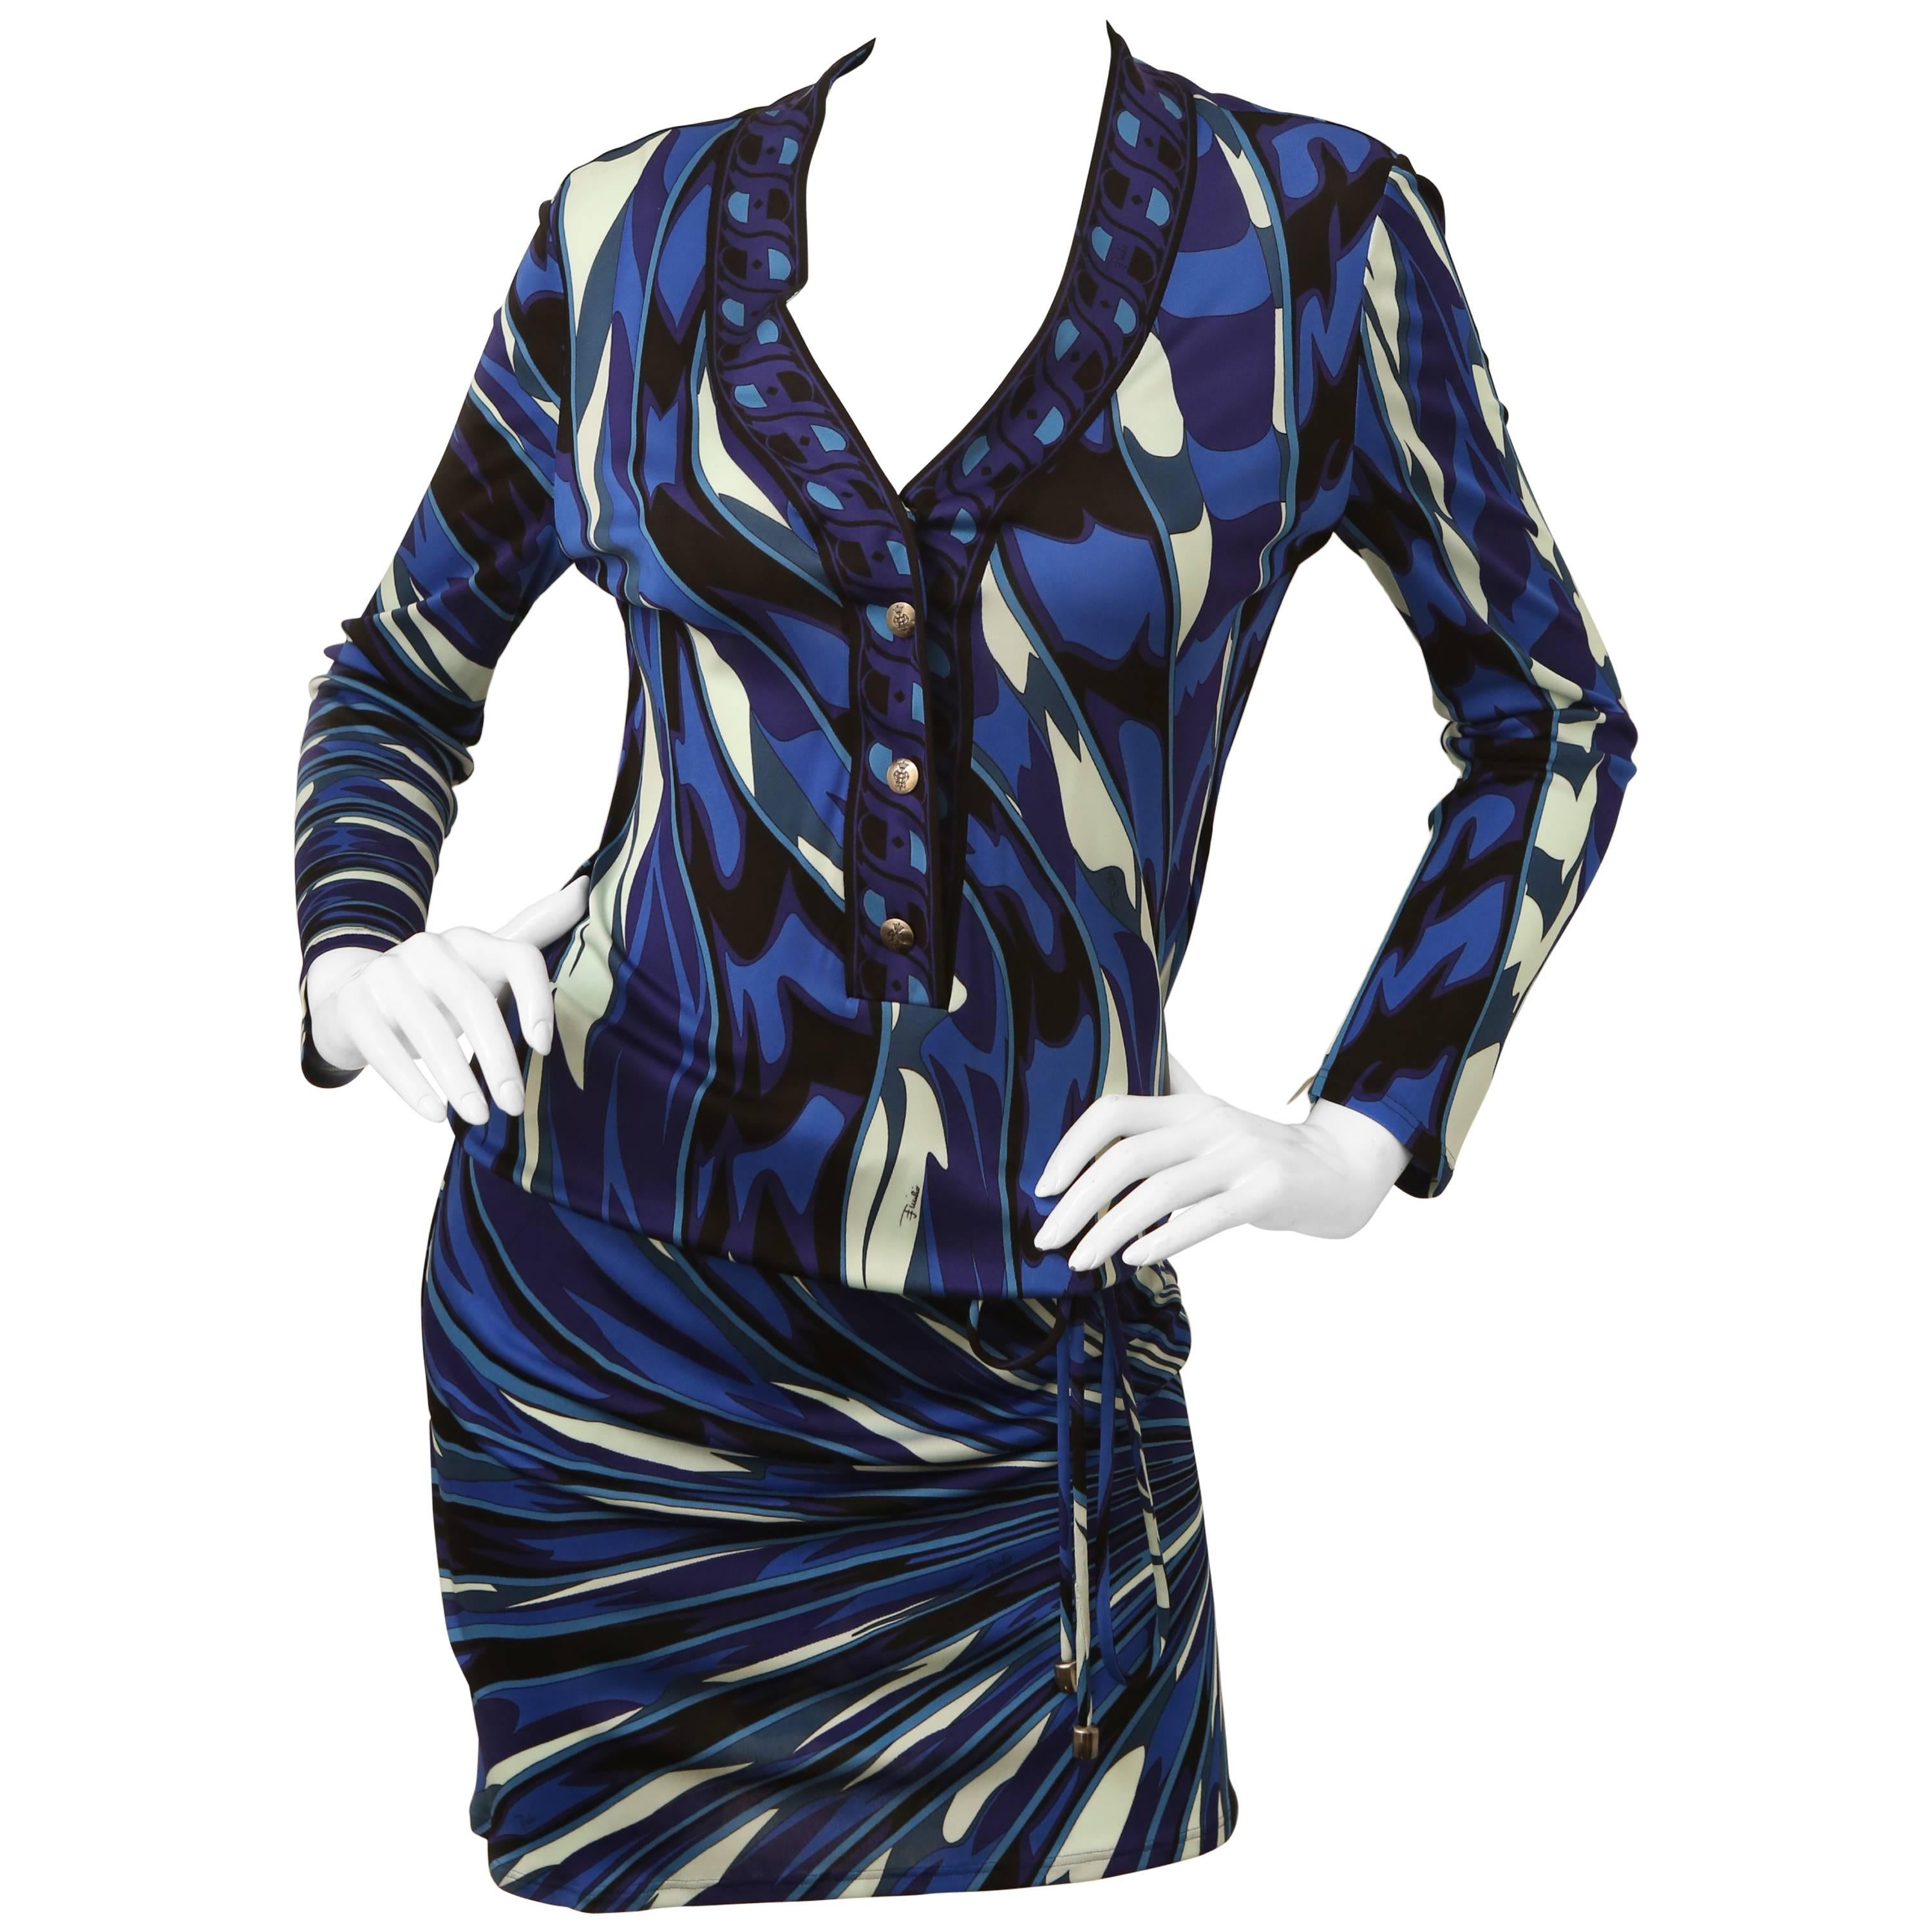 Emilio Pucci Blue/Multi Printed Dress With Cinched Drop Waist